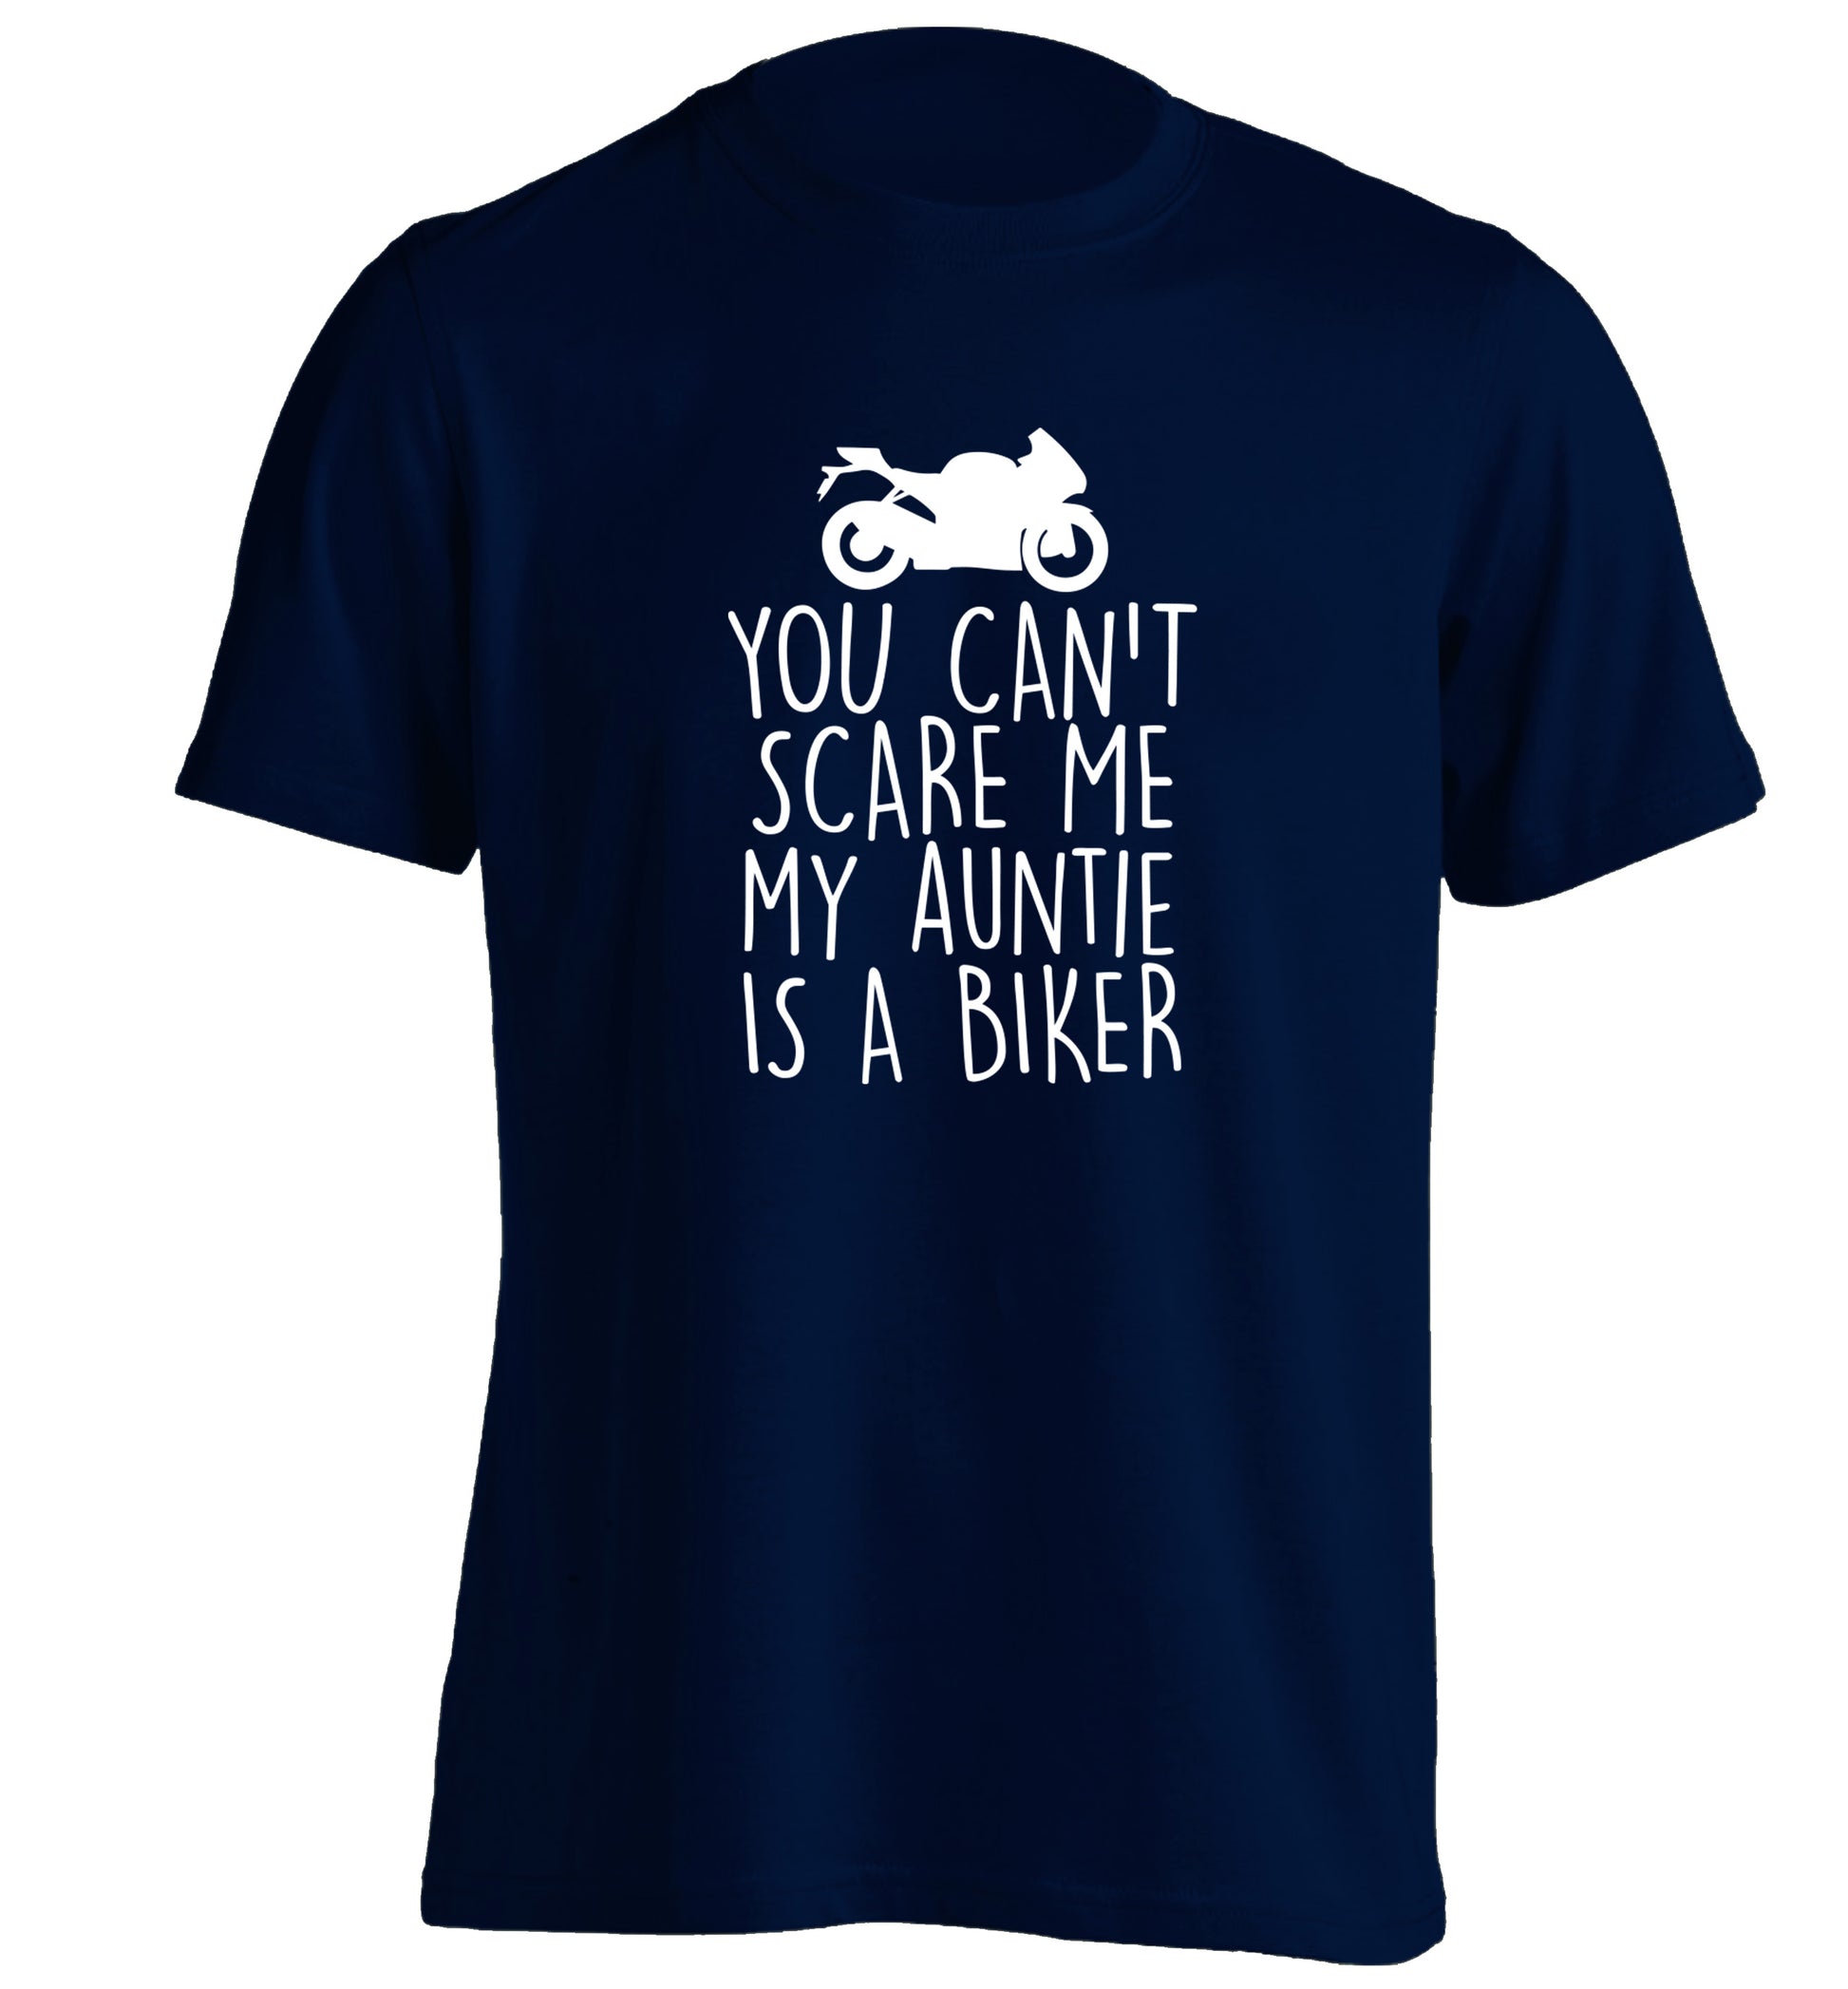 You can't scare me my auntie is a biker adults unisex navy Tshirt 2XL